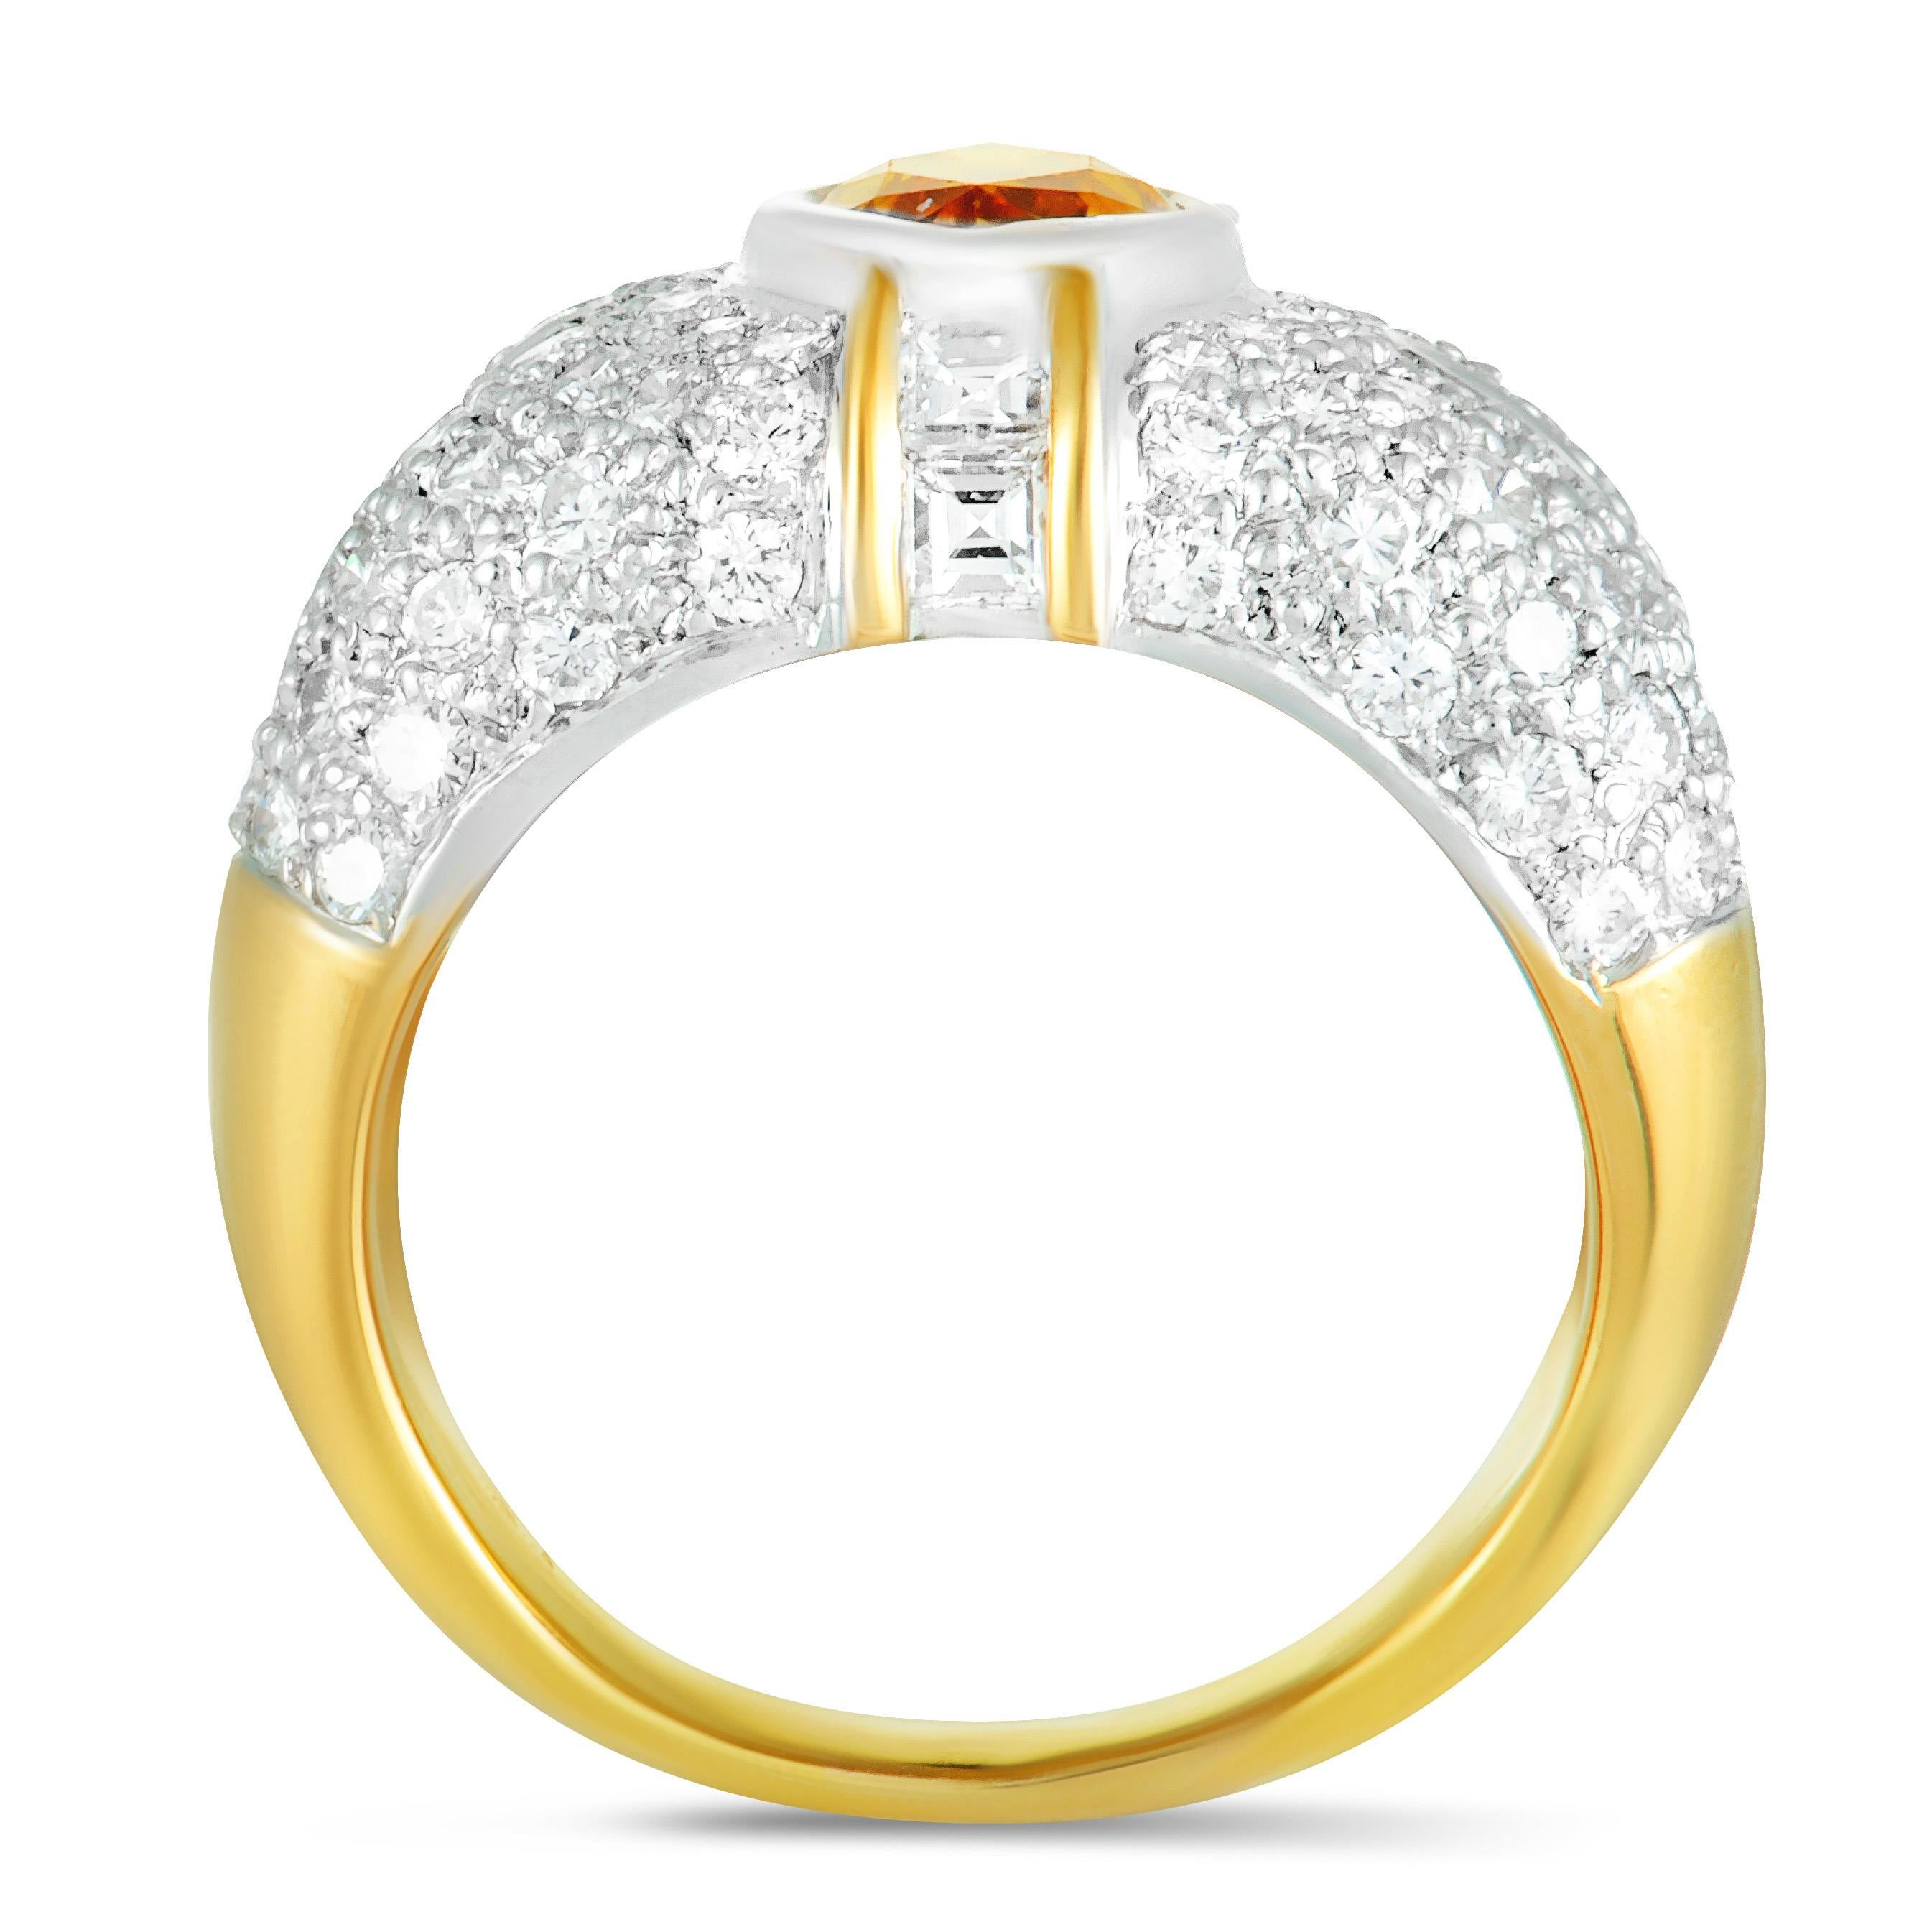 Elevate your style in a remarkably extravagant manner with this spectacular jewelry piece that is beautifully crafted from 18K white and 18K yellow gold and lavishly decorated with a plethora of attractive gems. The ring is set with a sublime yellow